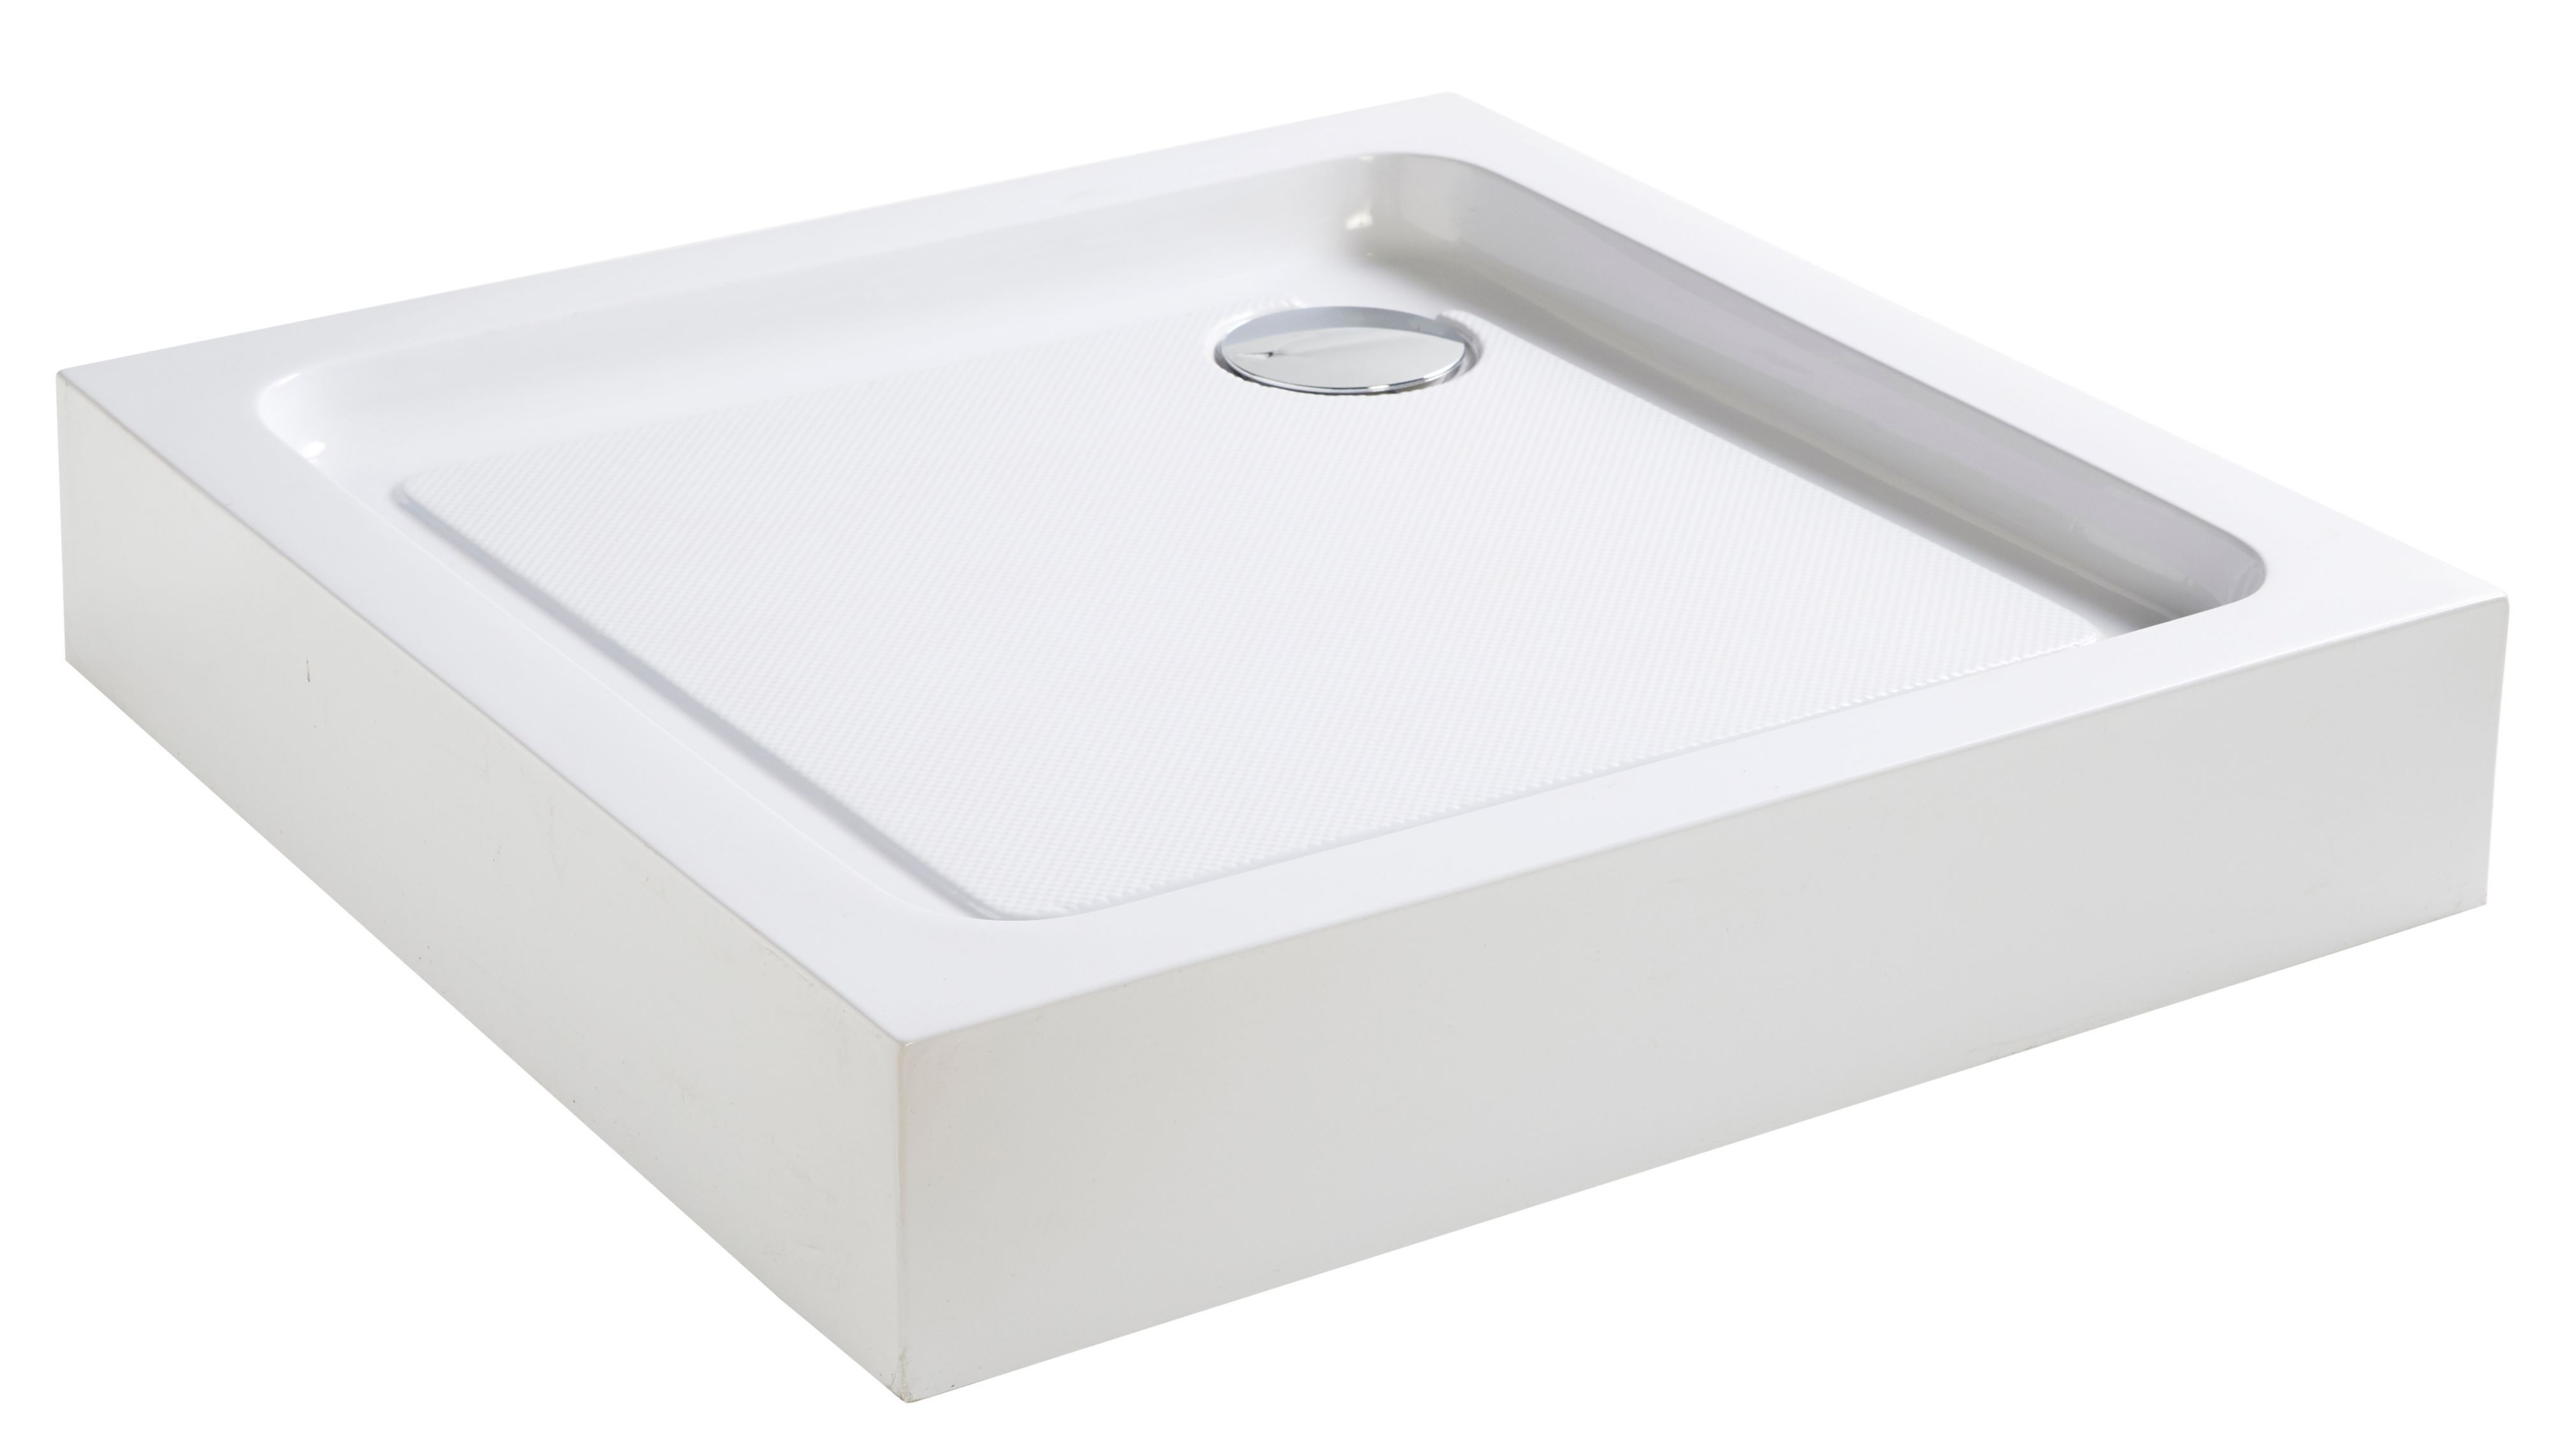 Cooke & Lewis Lagan White Square Shower tray (L)760mm (W)760mm